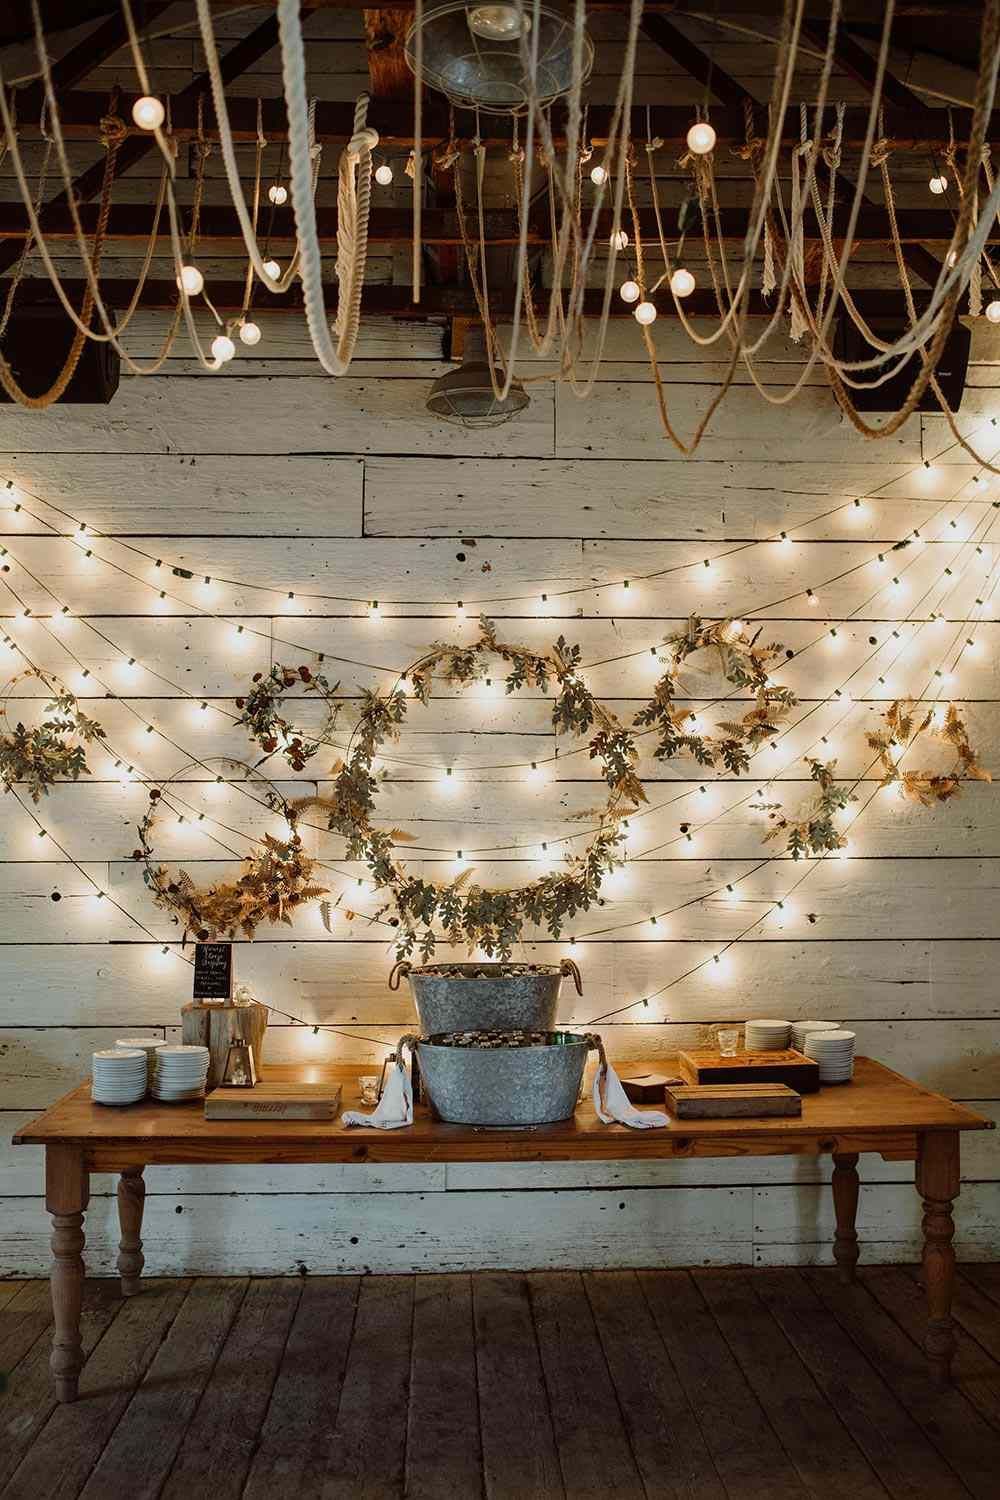 15 Gorgeous Ideas for Using String Lights Throughout Your Wedding -   15 Event Planning twinkle lights ideas